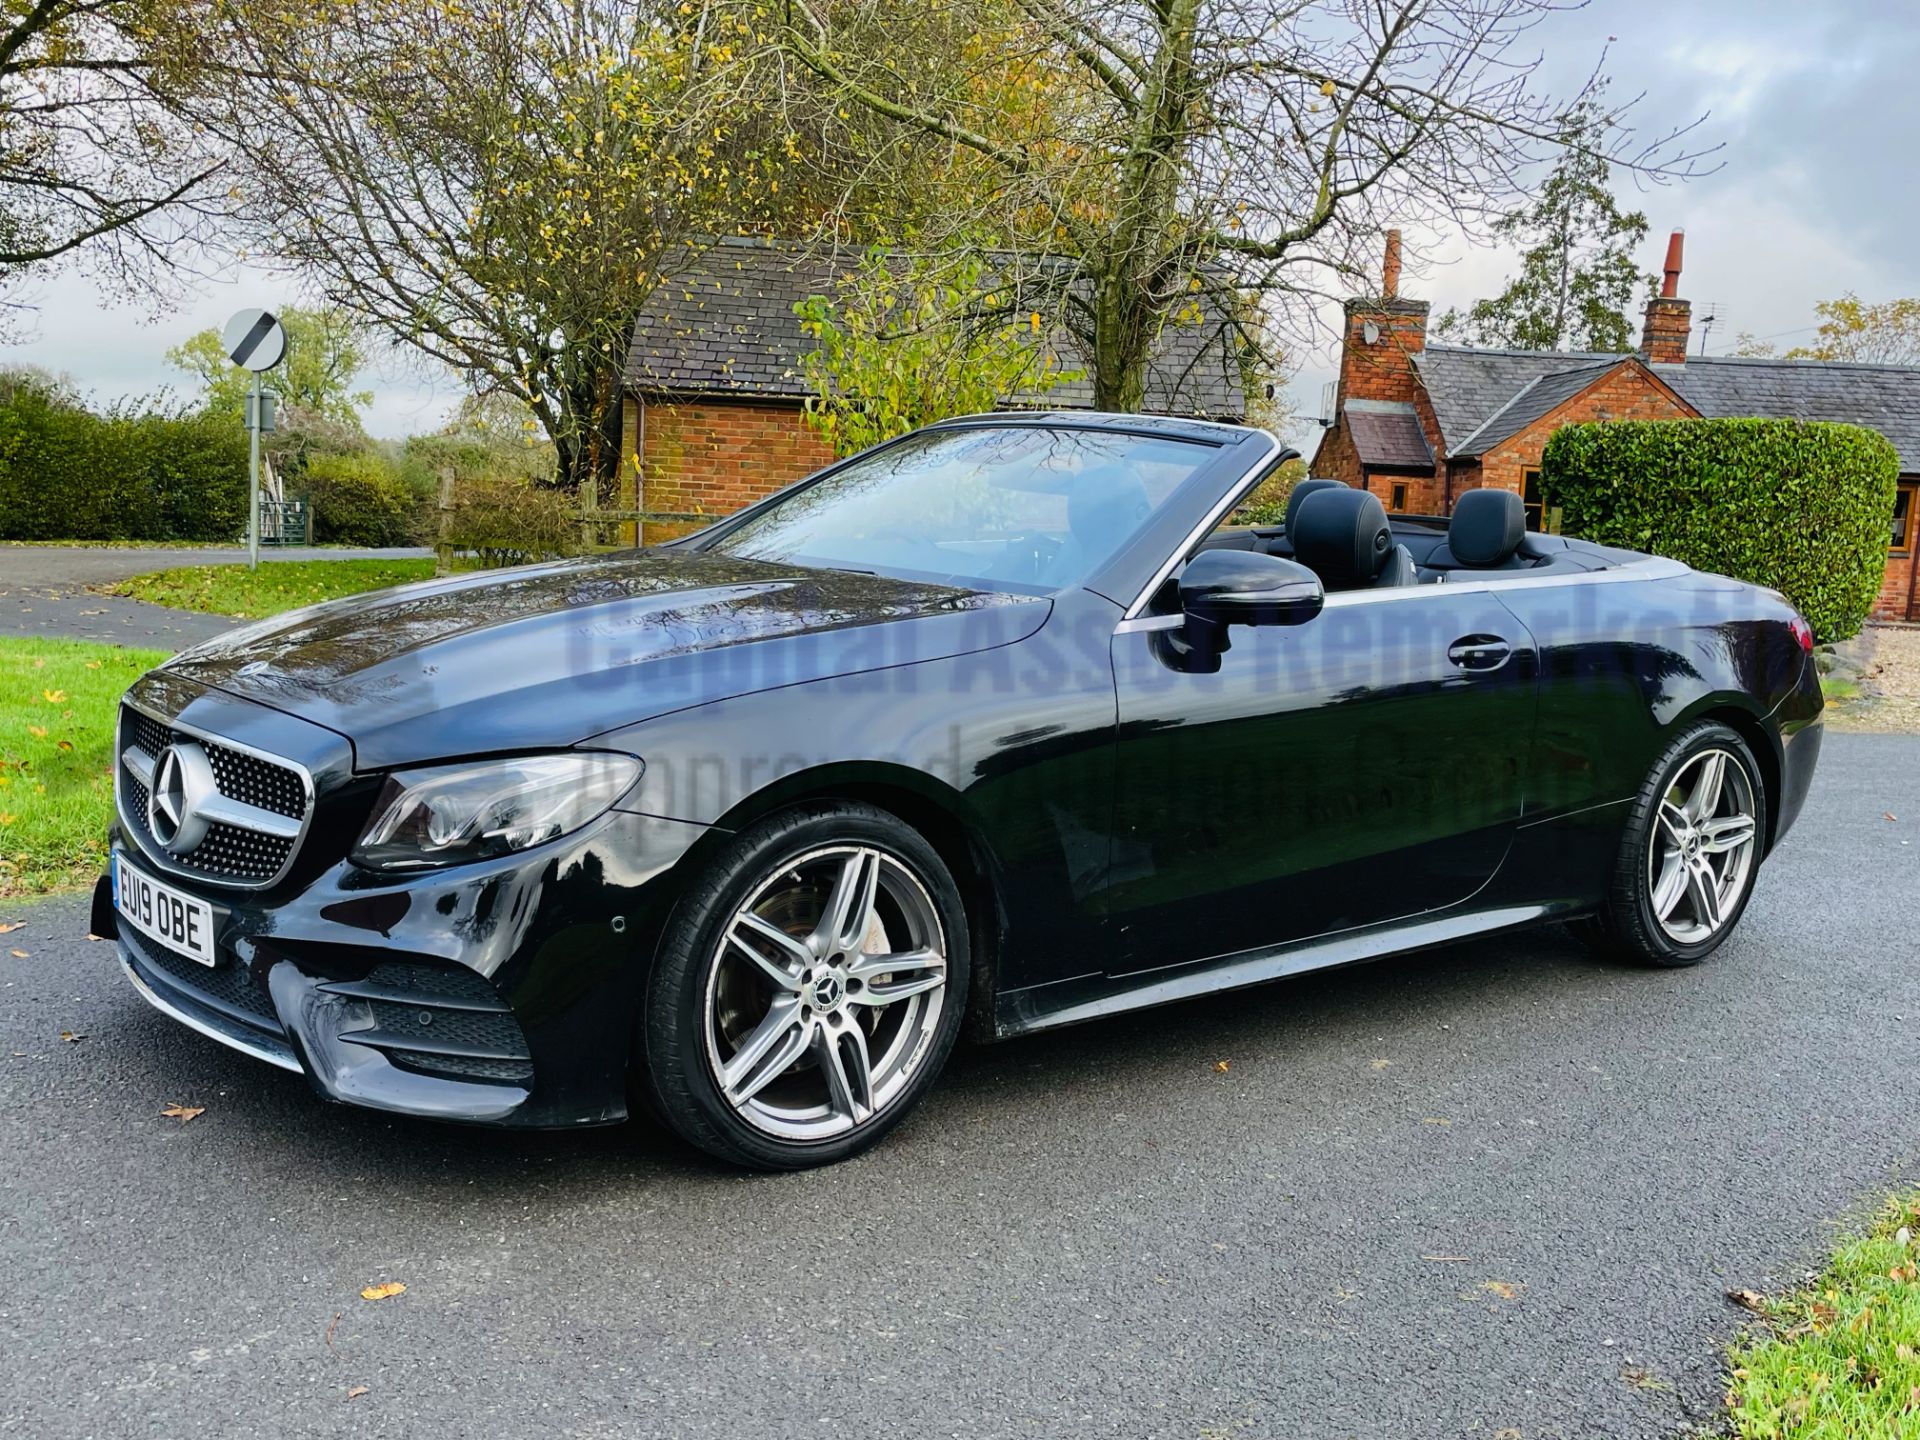 MERCEDES-BENZ E220D *AMG LINE - CABRIOLET* (2019 - EURO 6) '9G TRONIC AUTO - SAT NAV' *FULLY LOADED* - Image 11 of 66